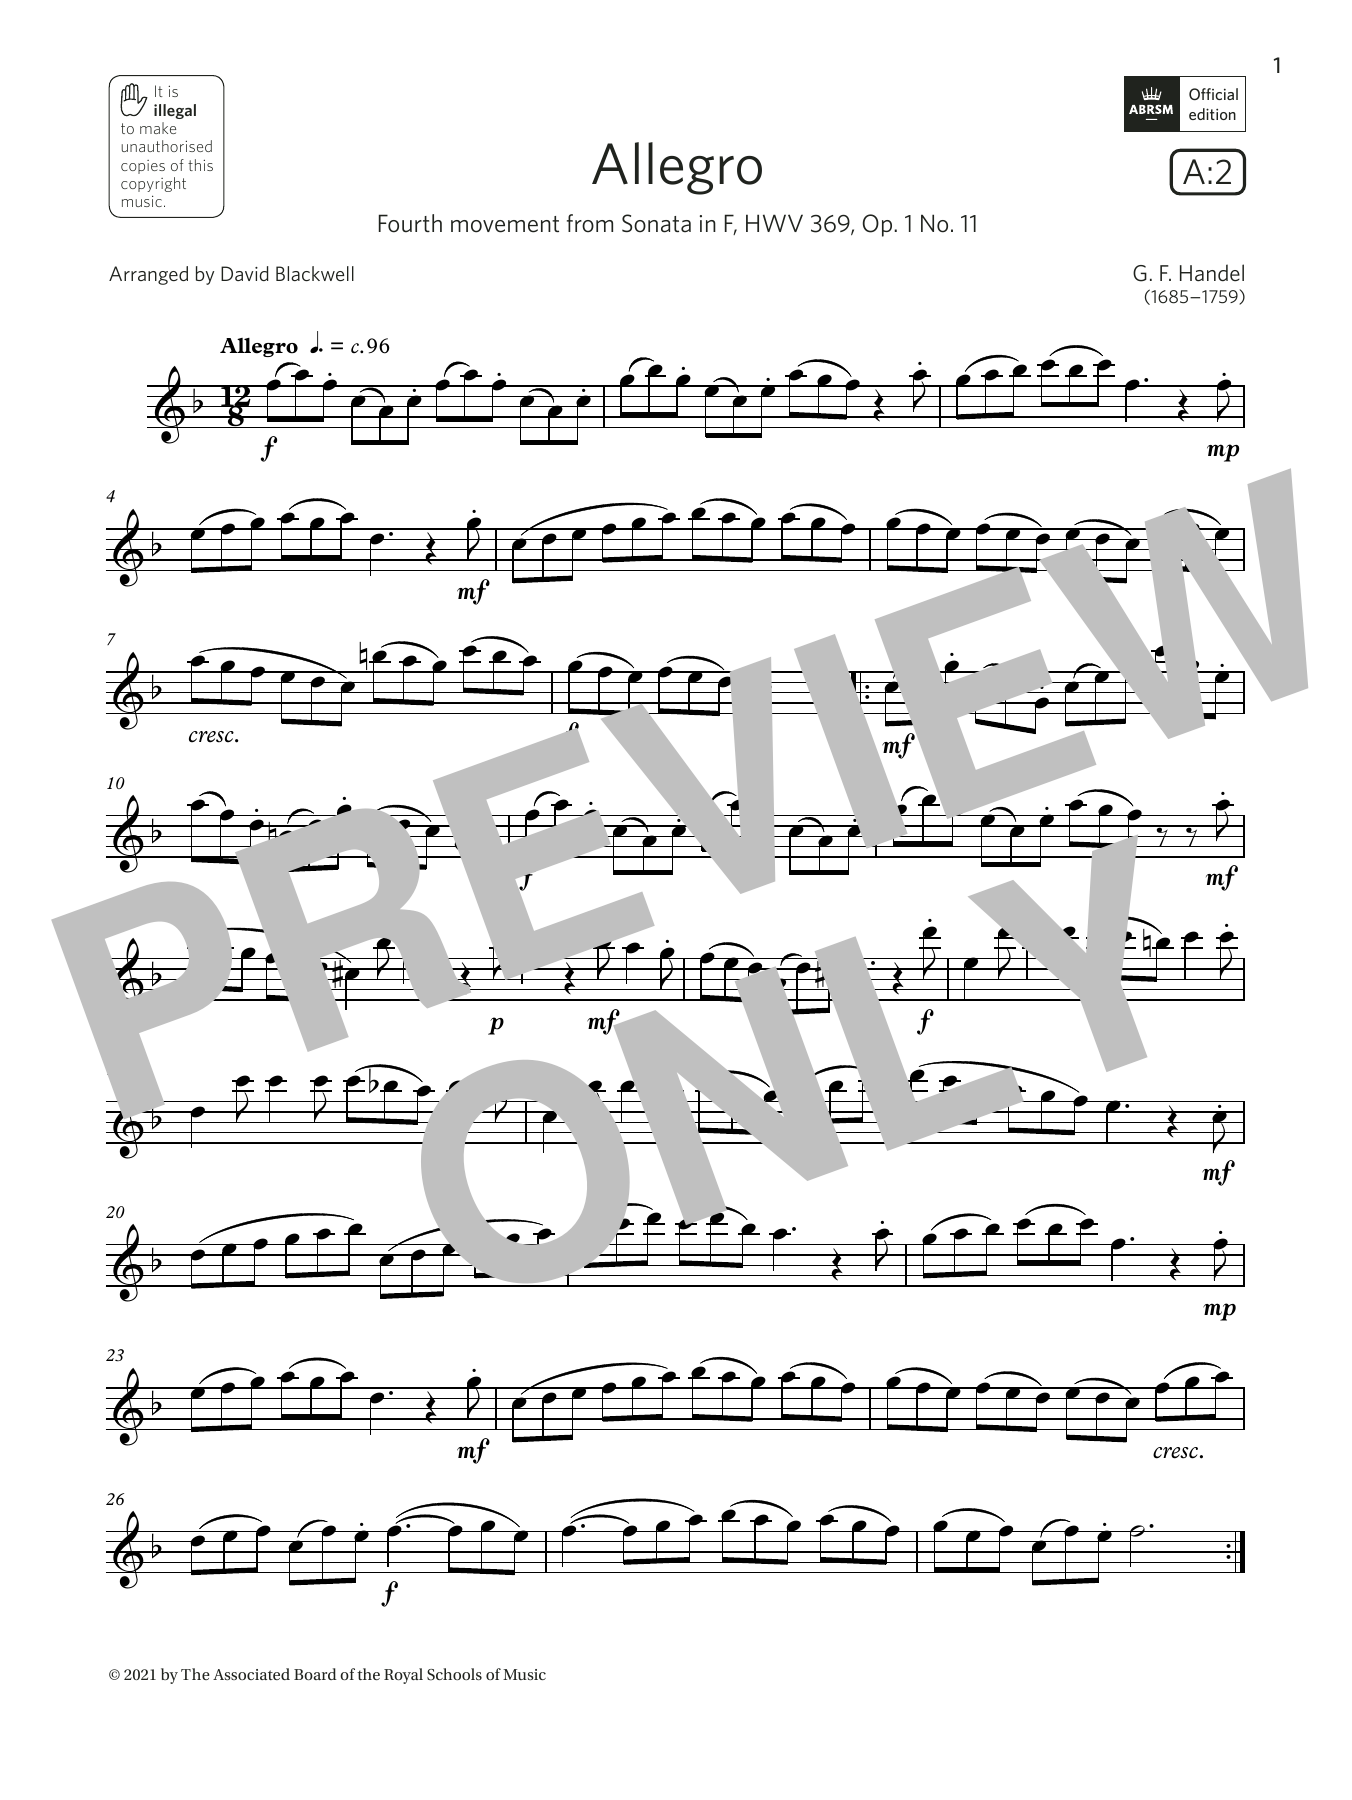 Download George Frideric Handel Allegro (from Sonata in F, Op.1 No.11) Sheet Music